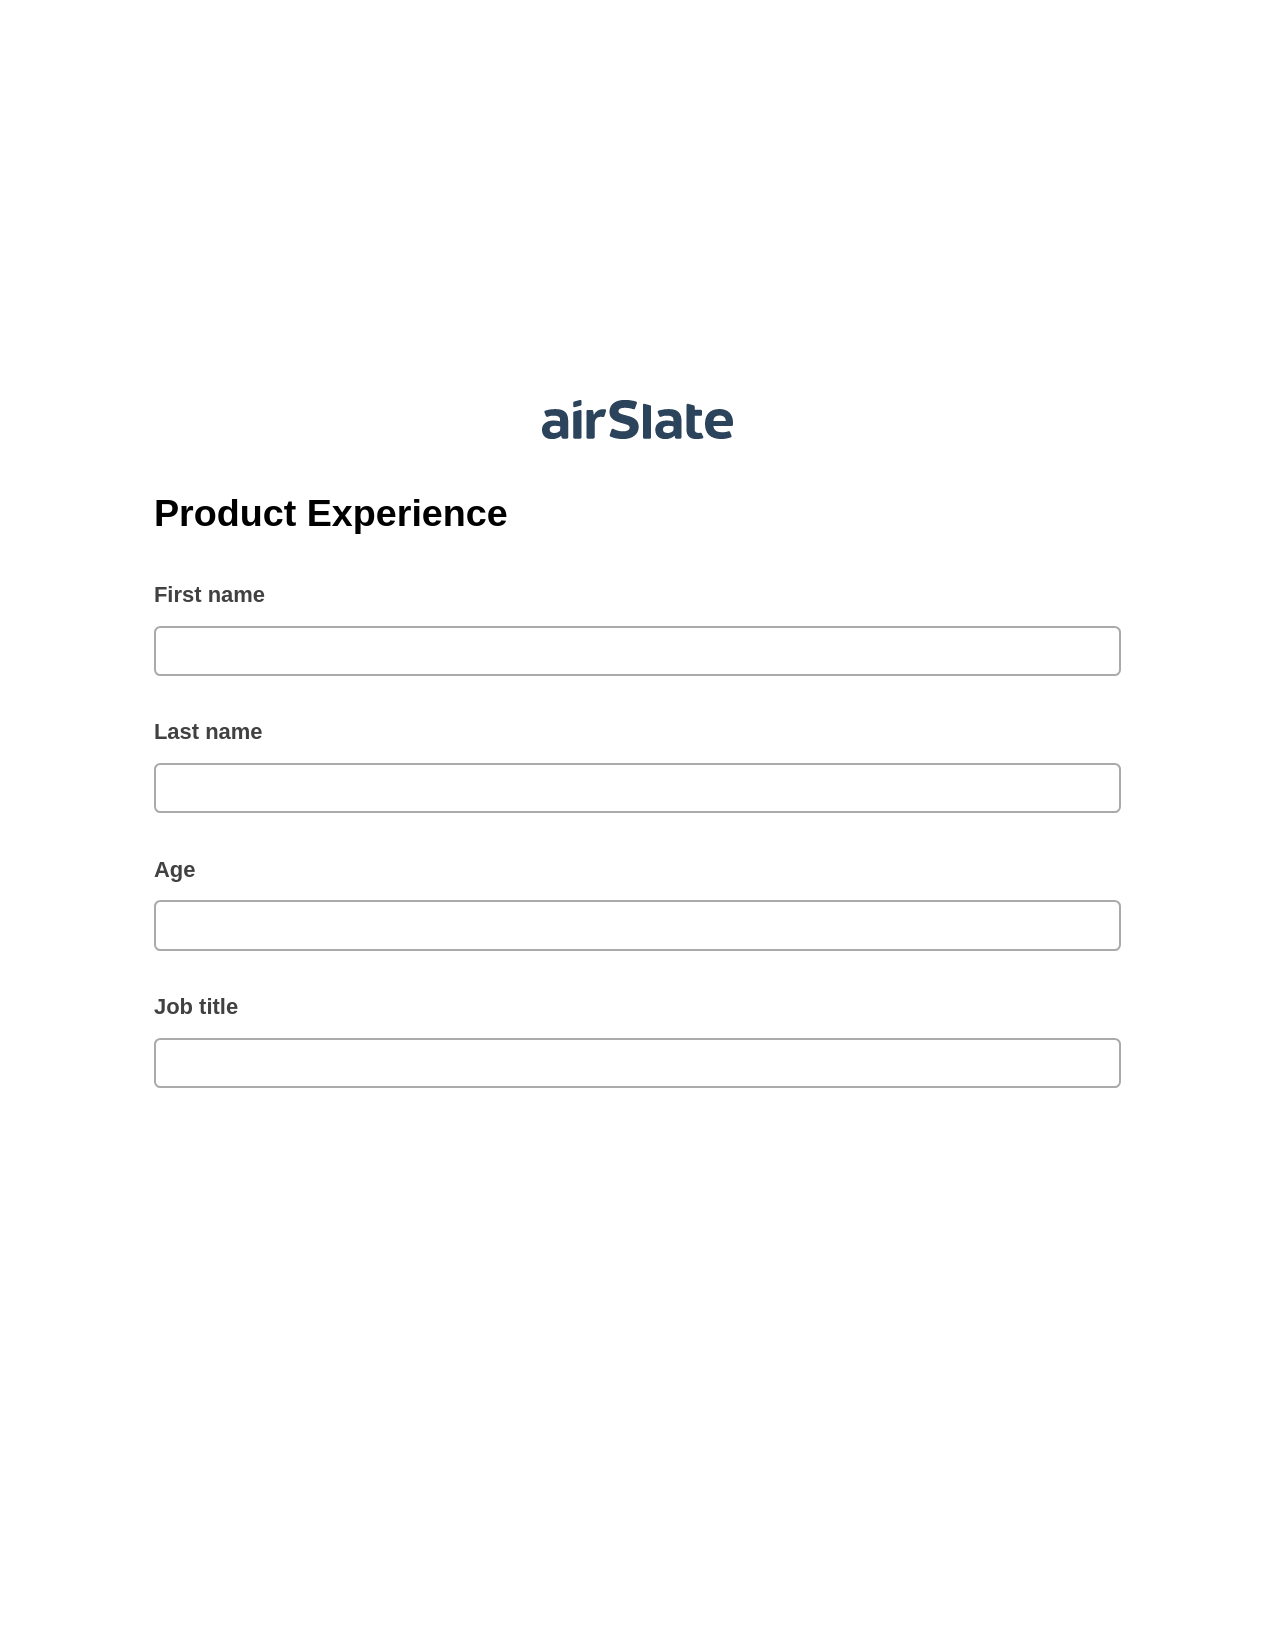 Product Experience Pre-fill Dropdowns from Excel Bot, Jira Bot, Post-finish Document Bot